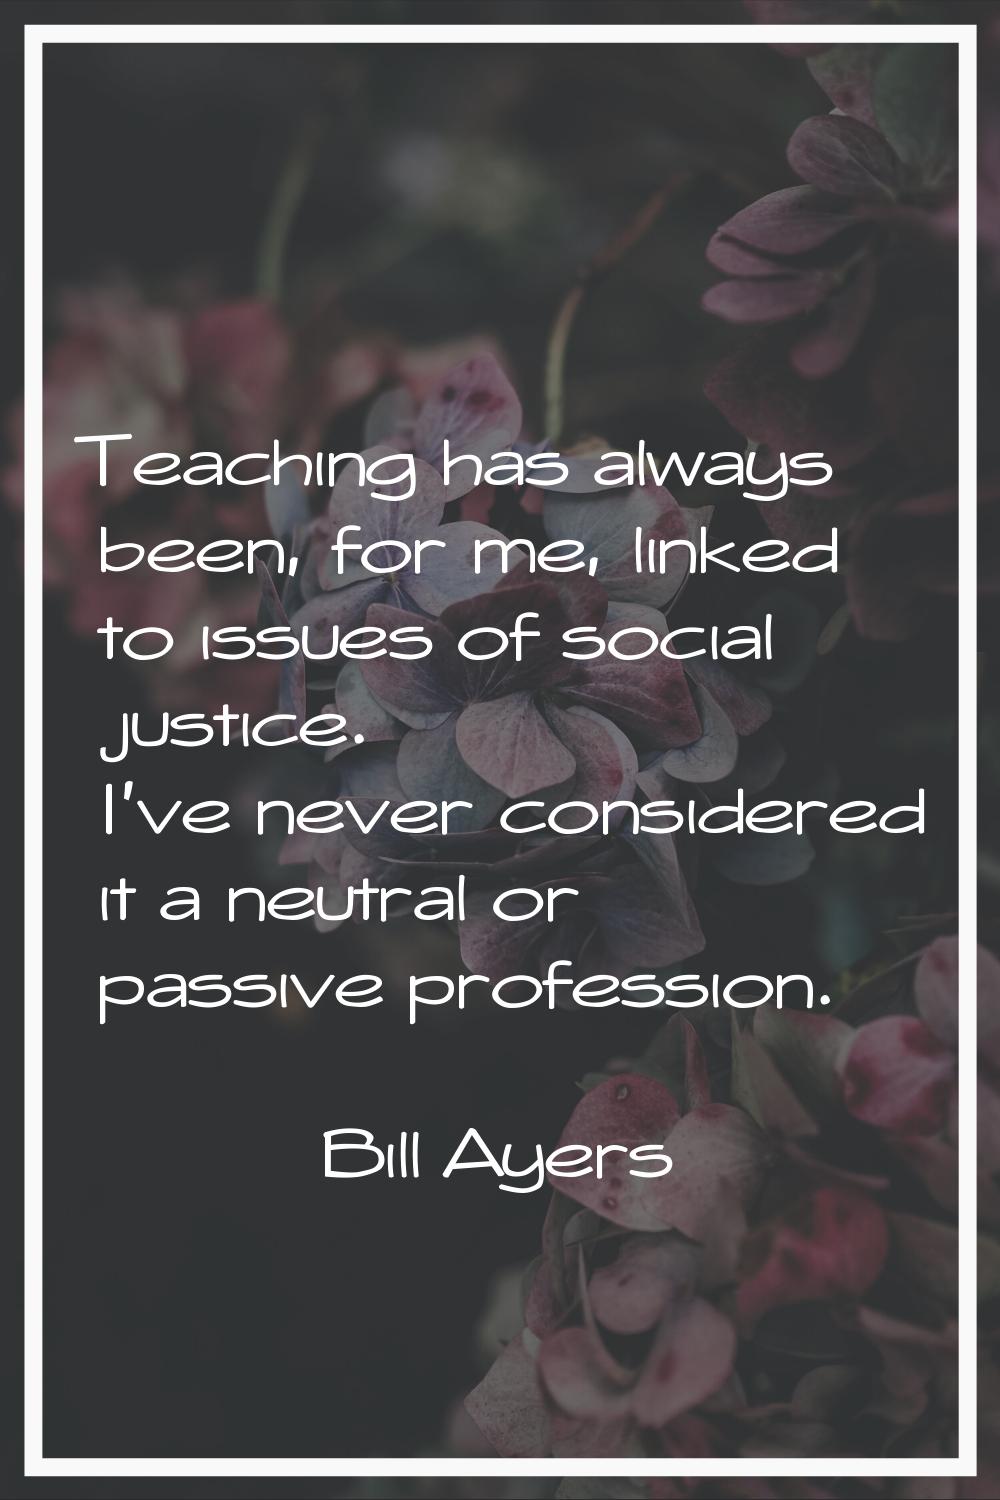 Teaching has always been, for me, linked to issues of social justice. I've never considered it a ne